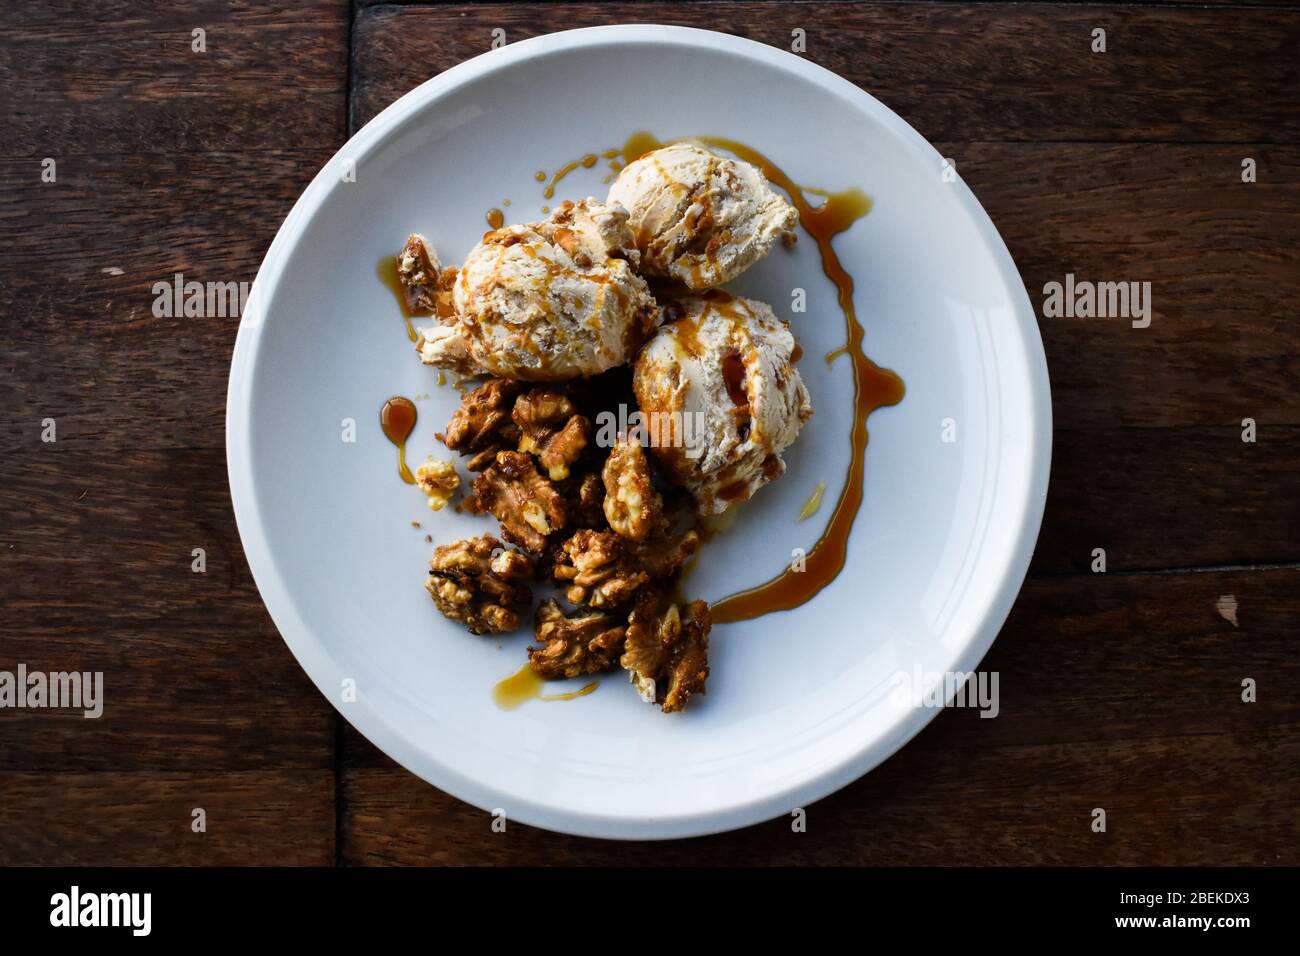 An Autumn Dessert Made Out Of Ginger Cookie Ice Cream And Caramelised Walnut Topped With Caramel Sauce Stock Photo Alamy,What Are Cloves Called In Nigeria